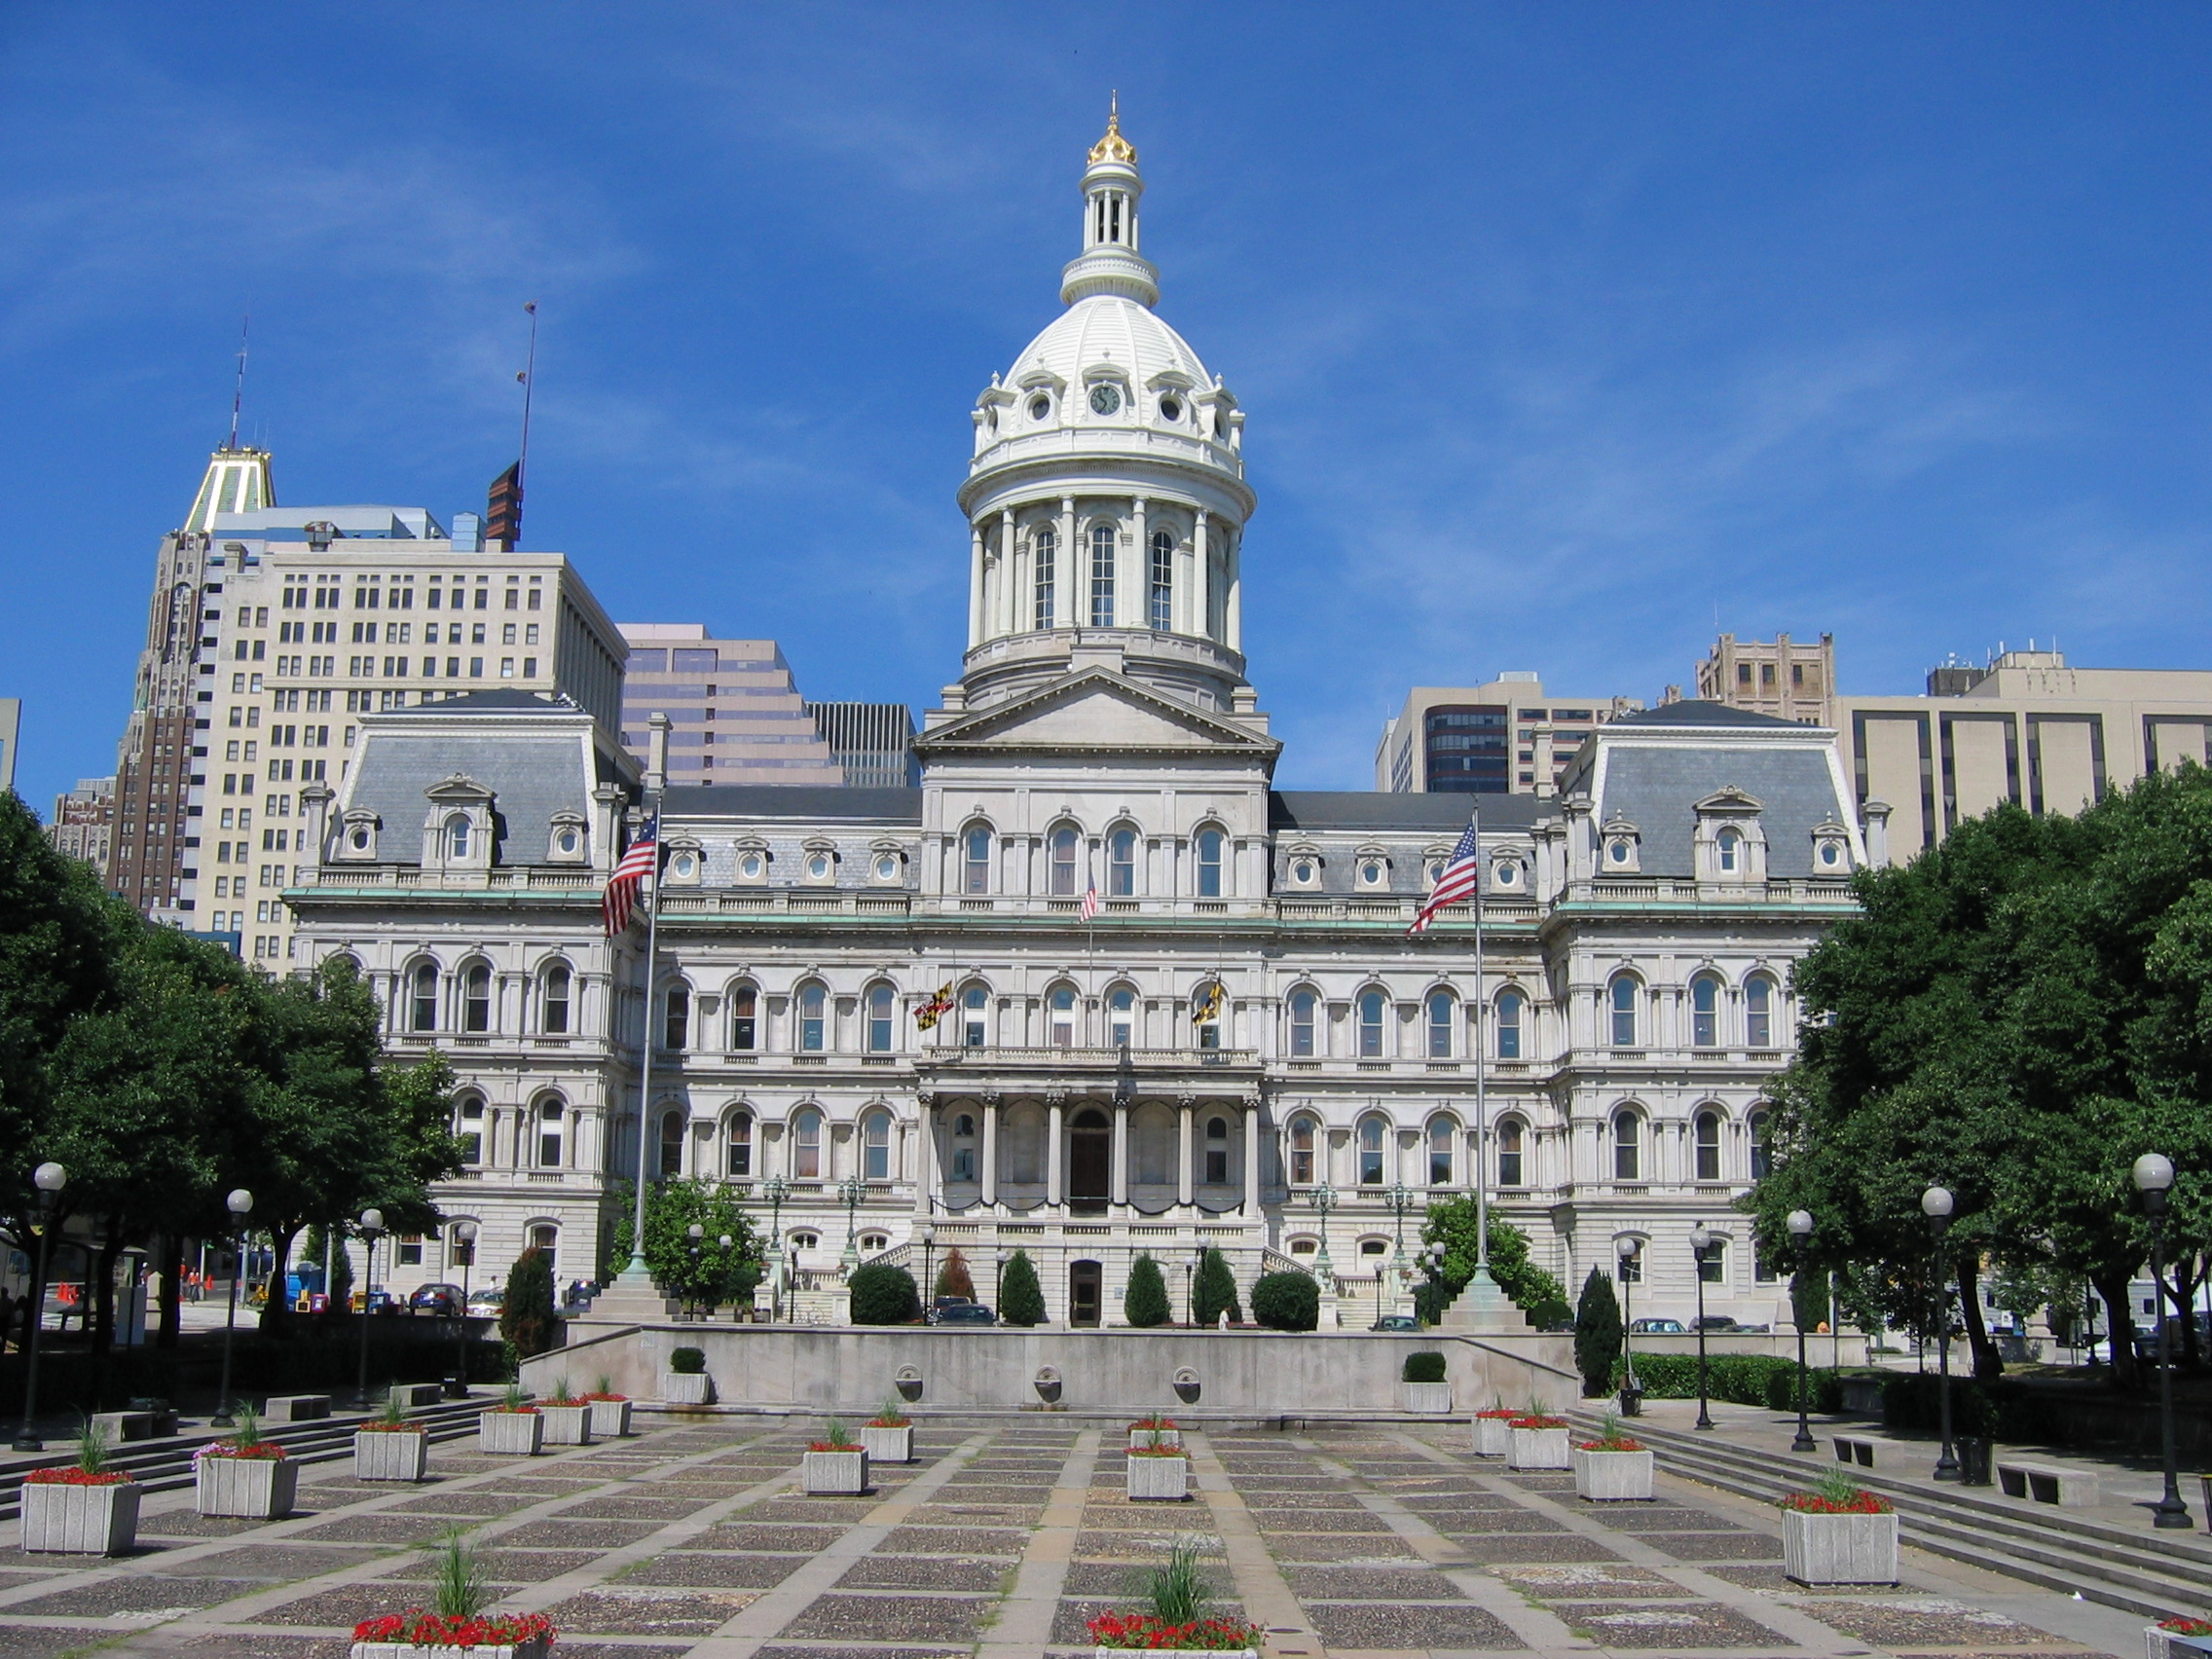 Engineer's Guide to Baltimore: City Hall